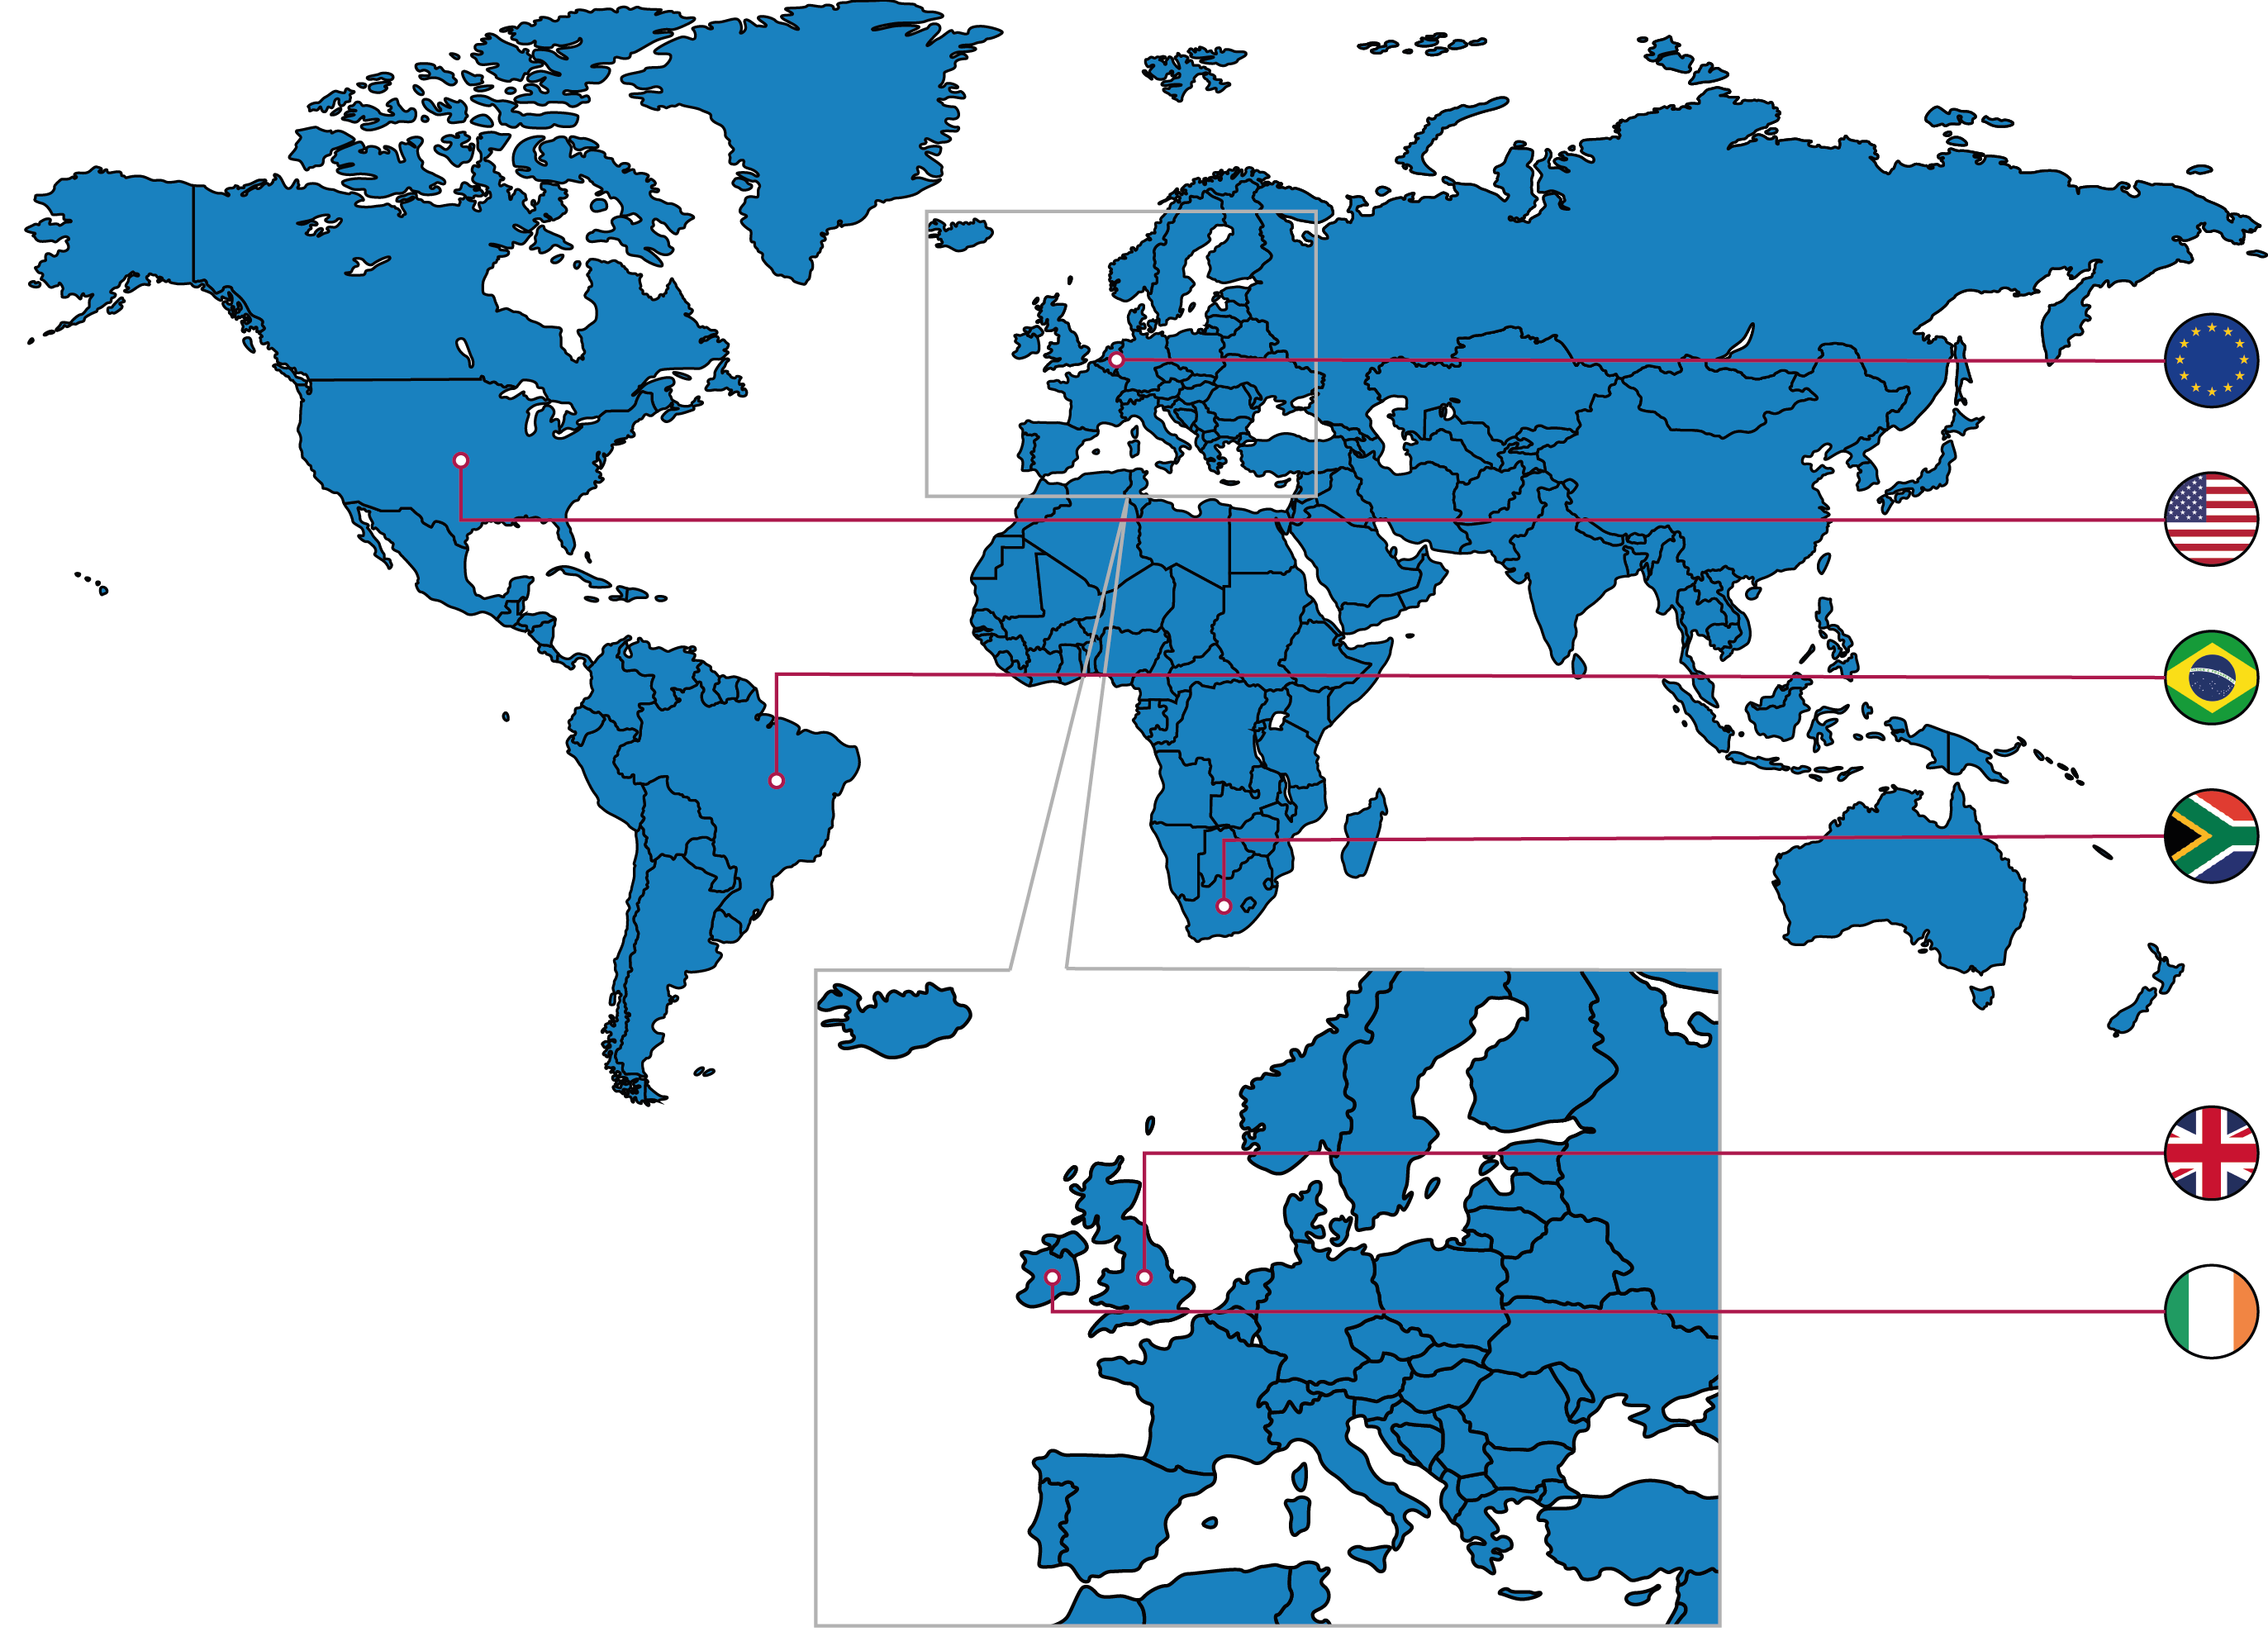 A map of the world, showing the countries in which organisations endorsing ARRIVE can be found